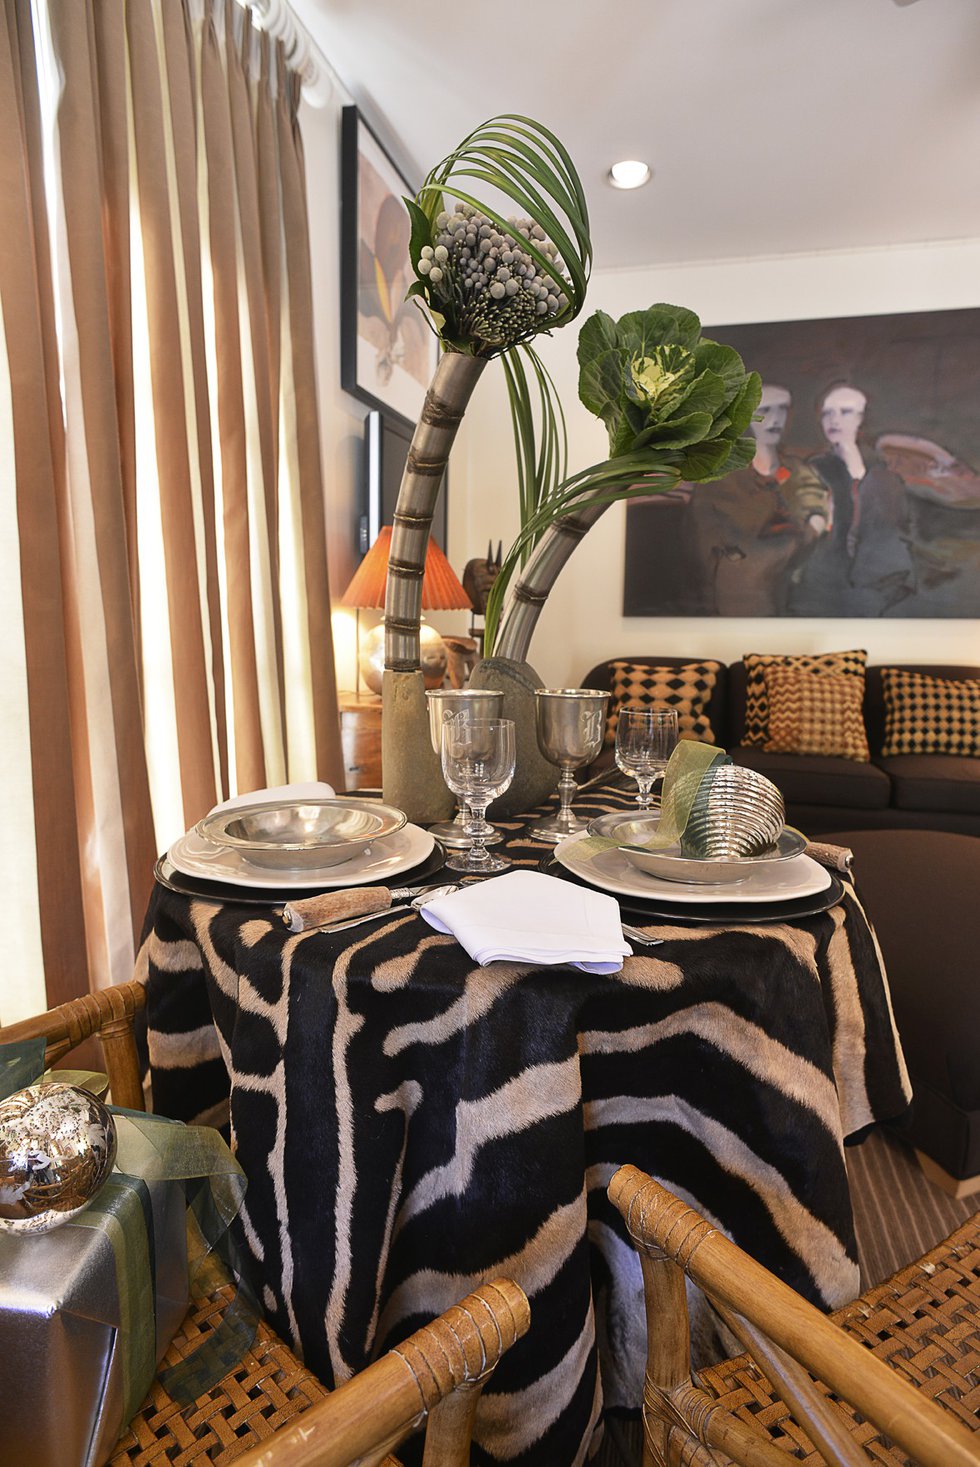 The stunning, very contemporary tablescape in the guest house has an exotic African vibe in keeping with the rattan furniture and zebra rugs.